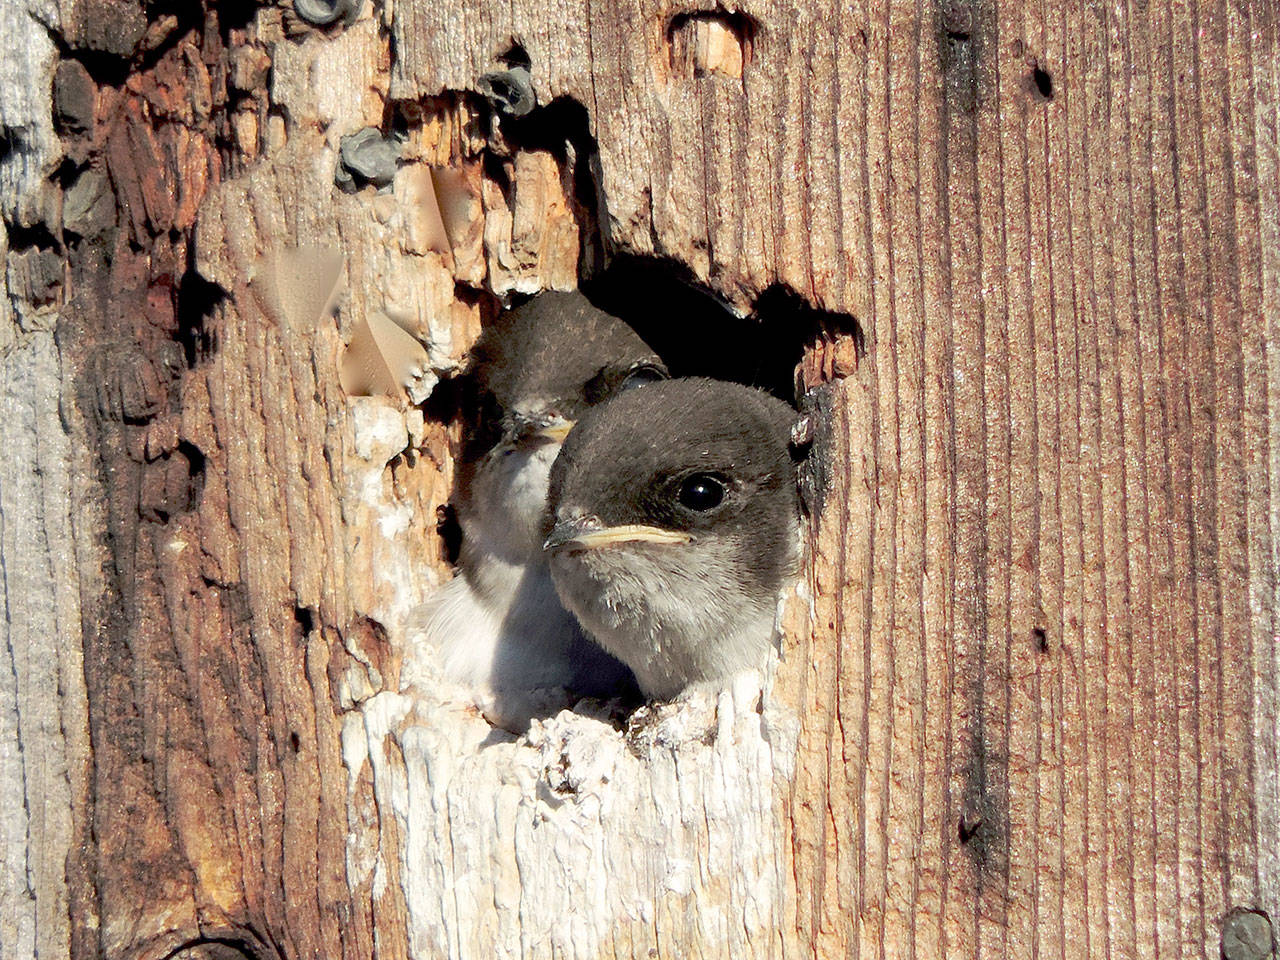 Baby swallows peek from a Port Angeles nesting box. (Philip D. Lusk)